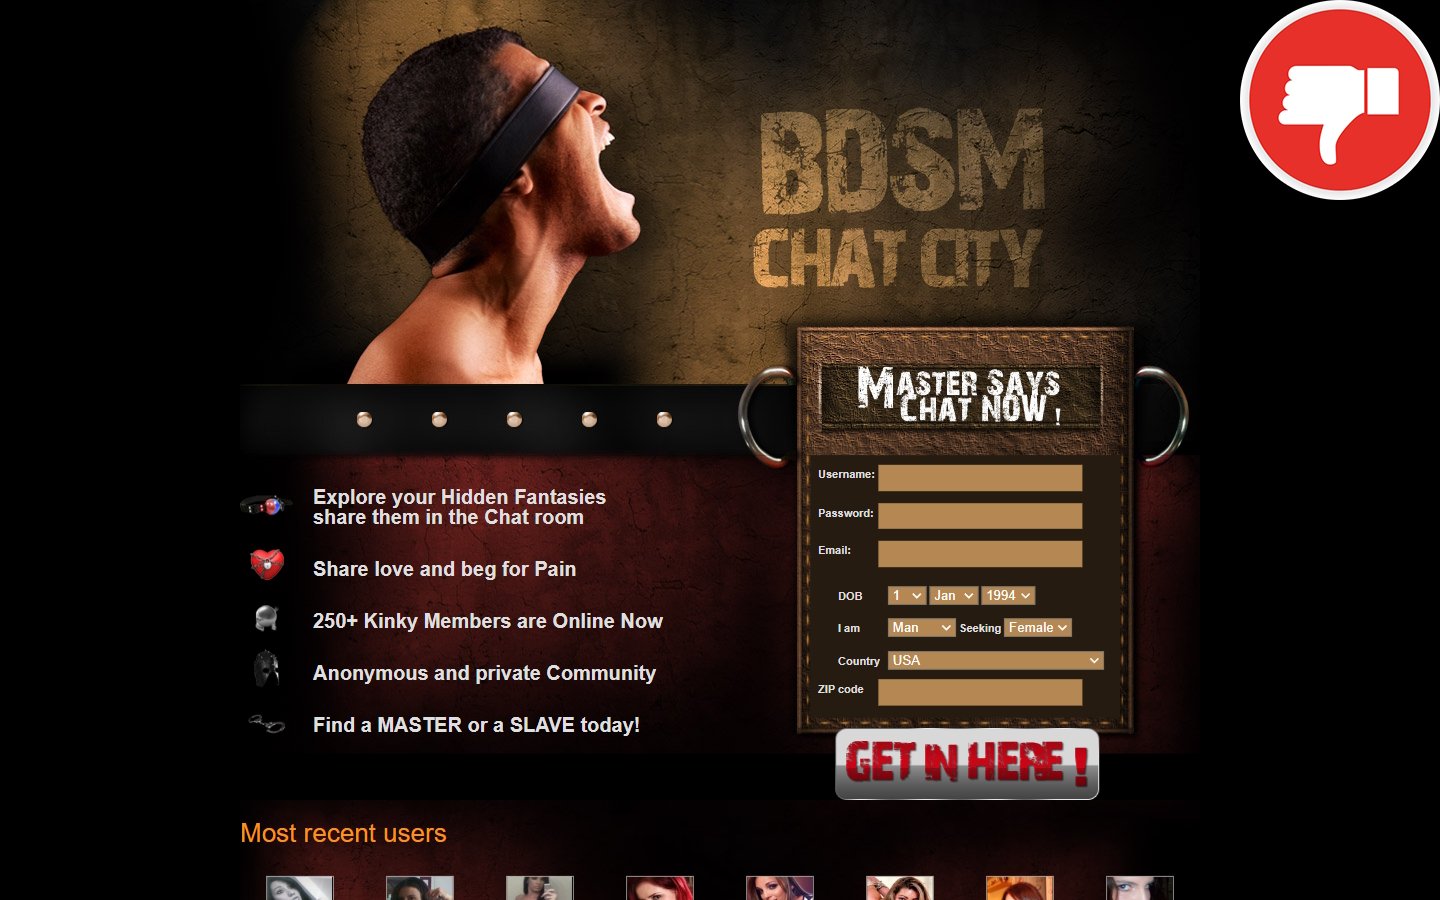 Review BDSMChatCity.net Scam